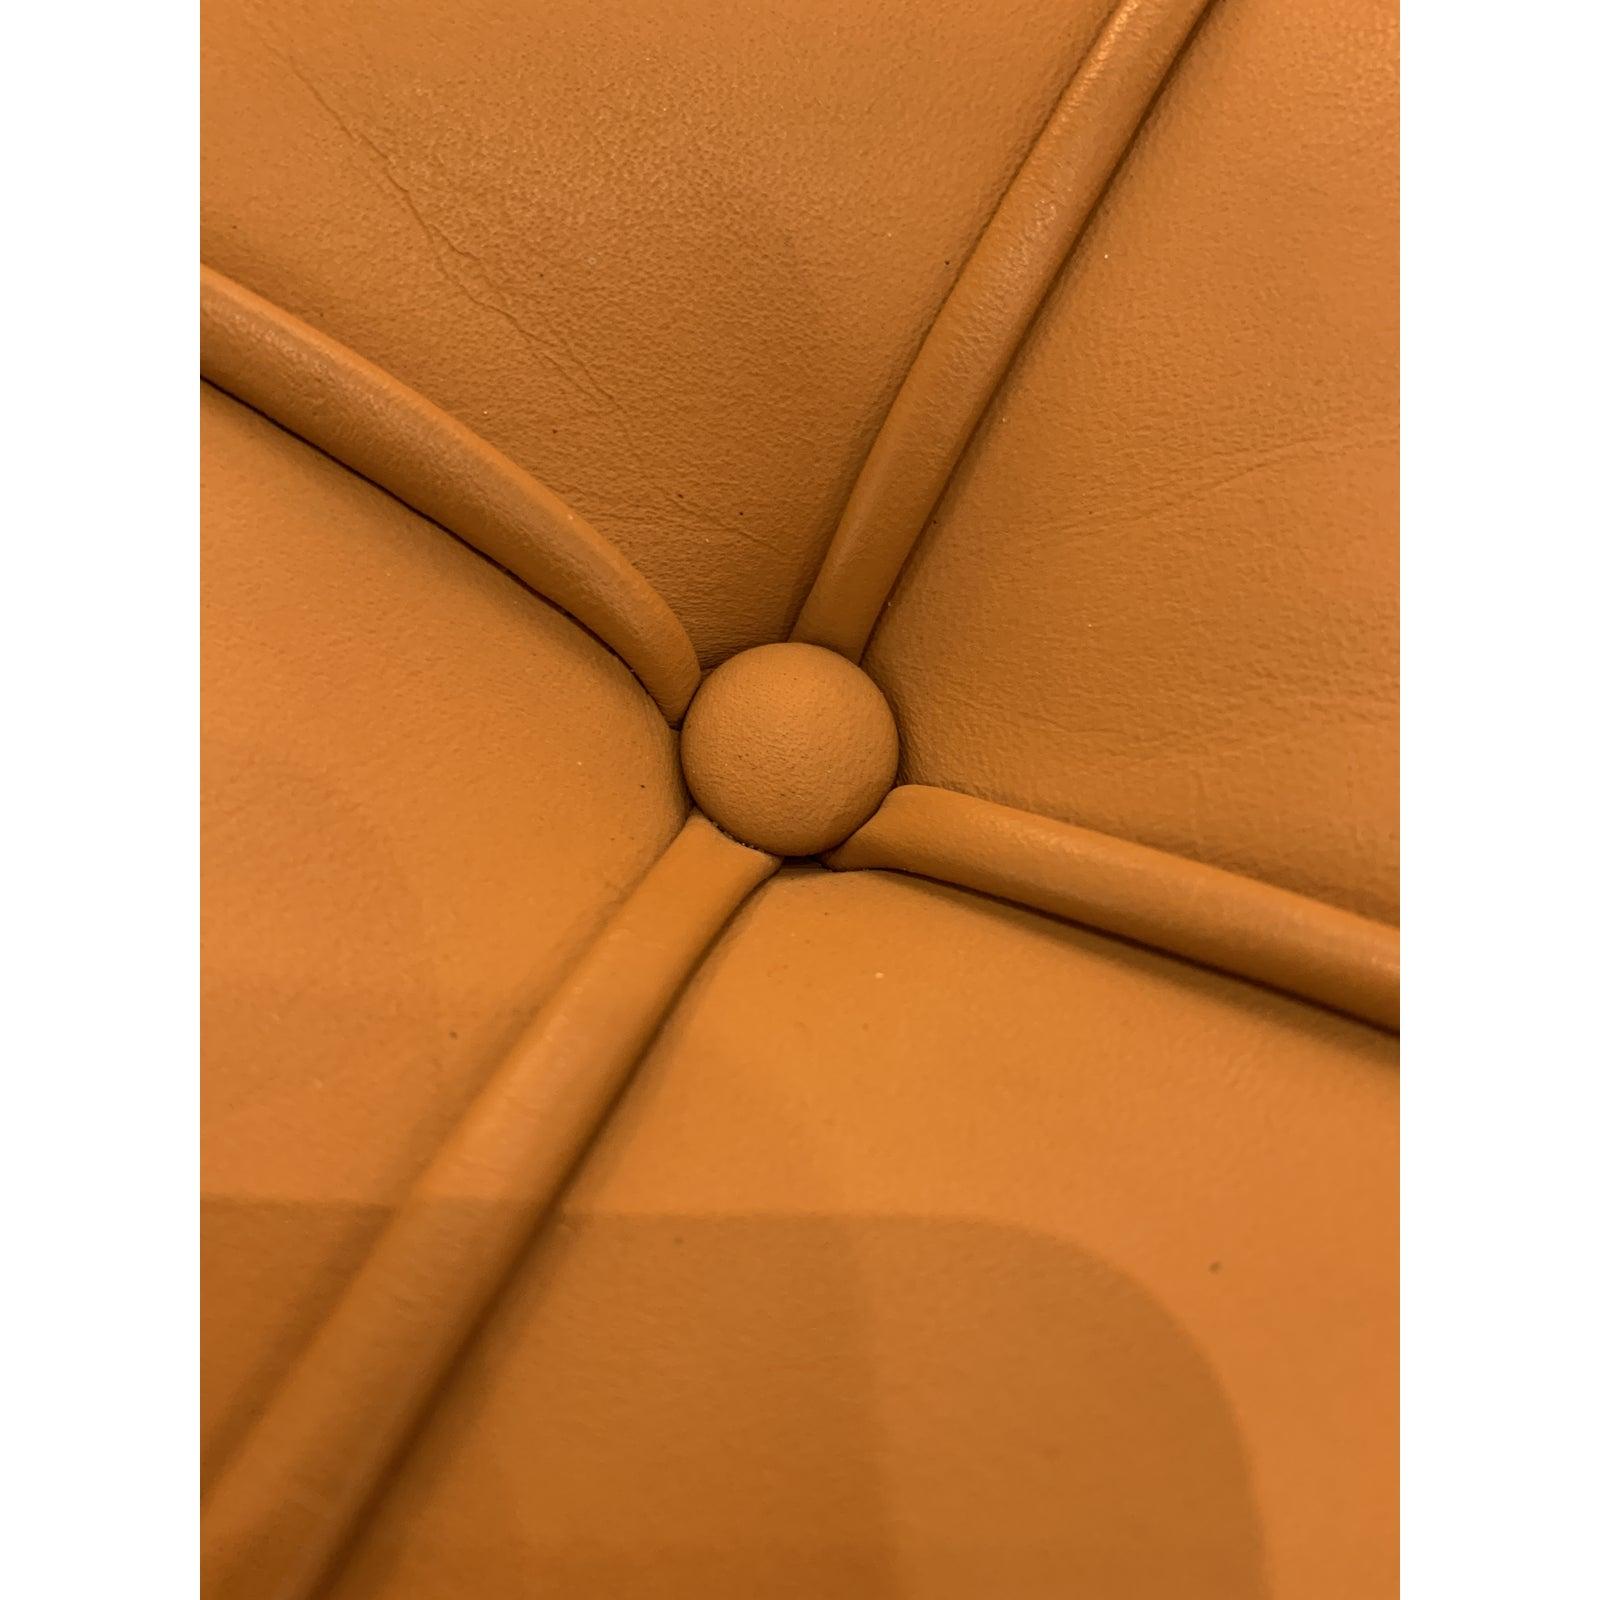 Knoll Studio Volo Tan Leather Barcelona Chair and Ottoman In Good Condition For Sale In San Francisco, CA